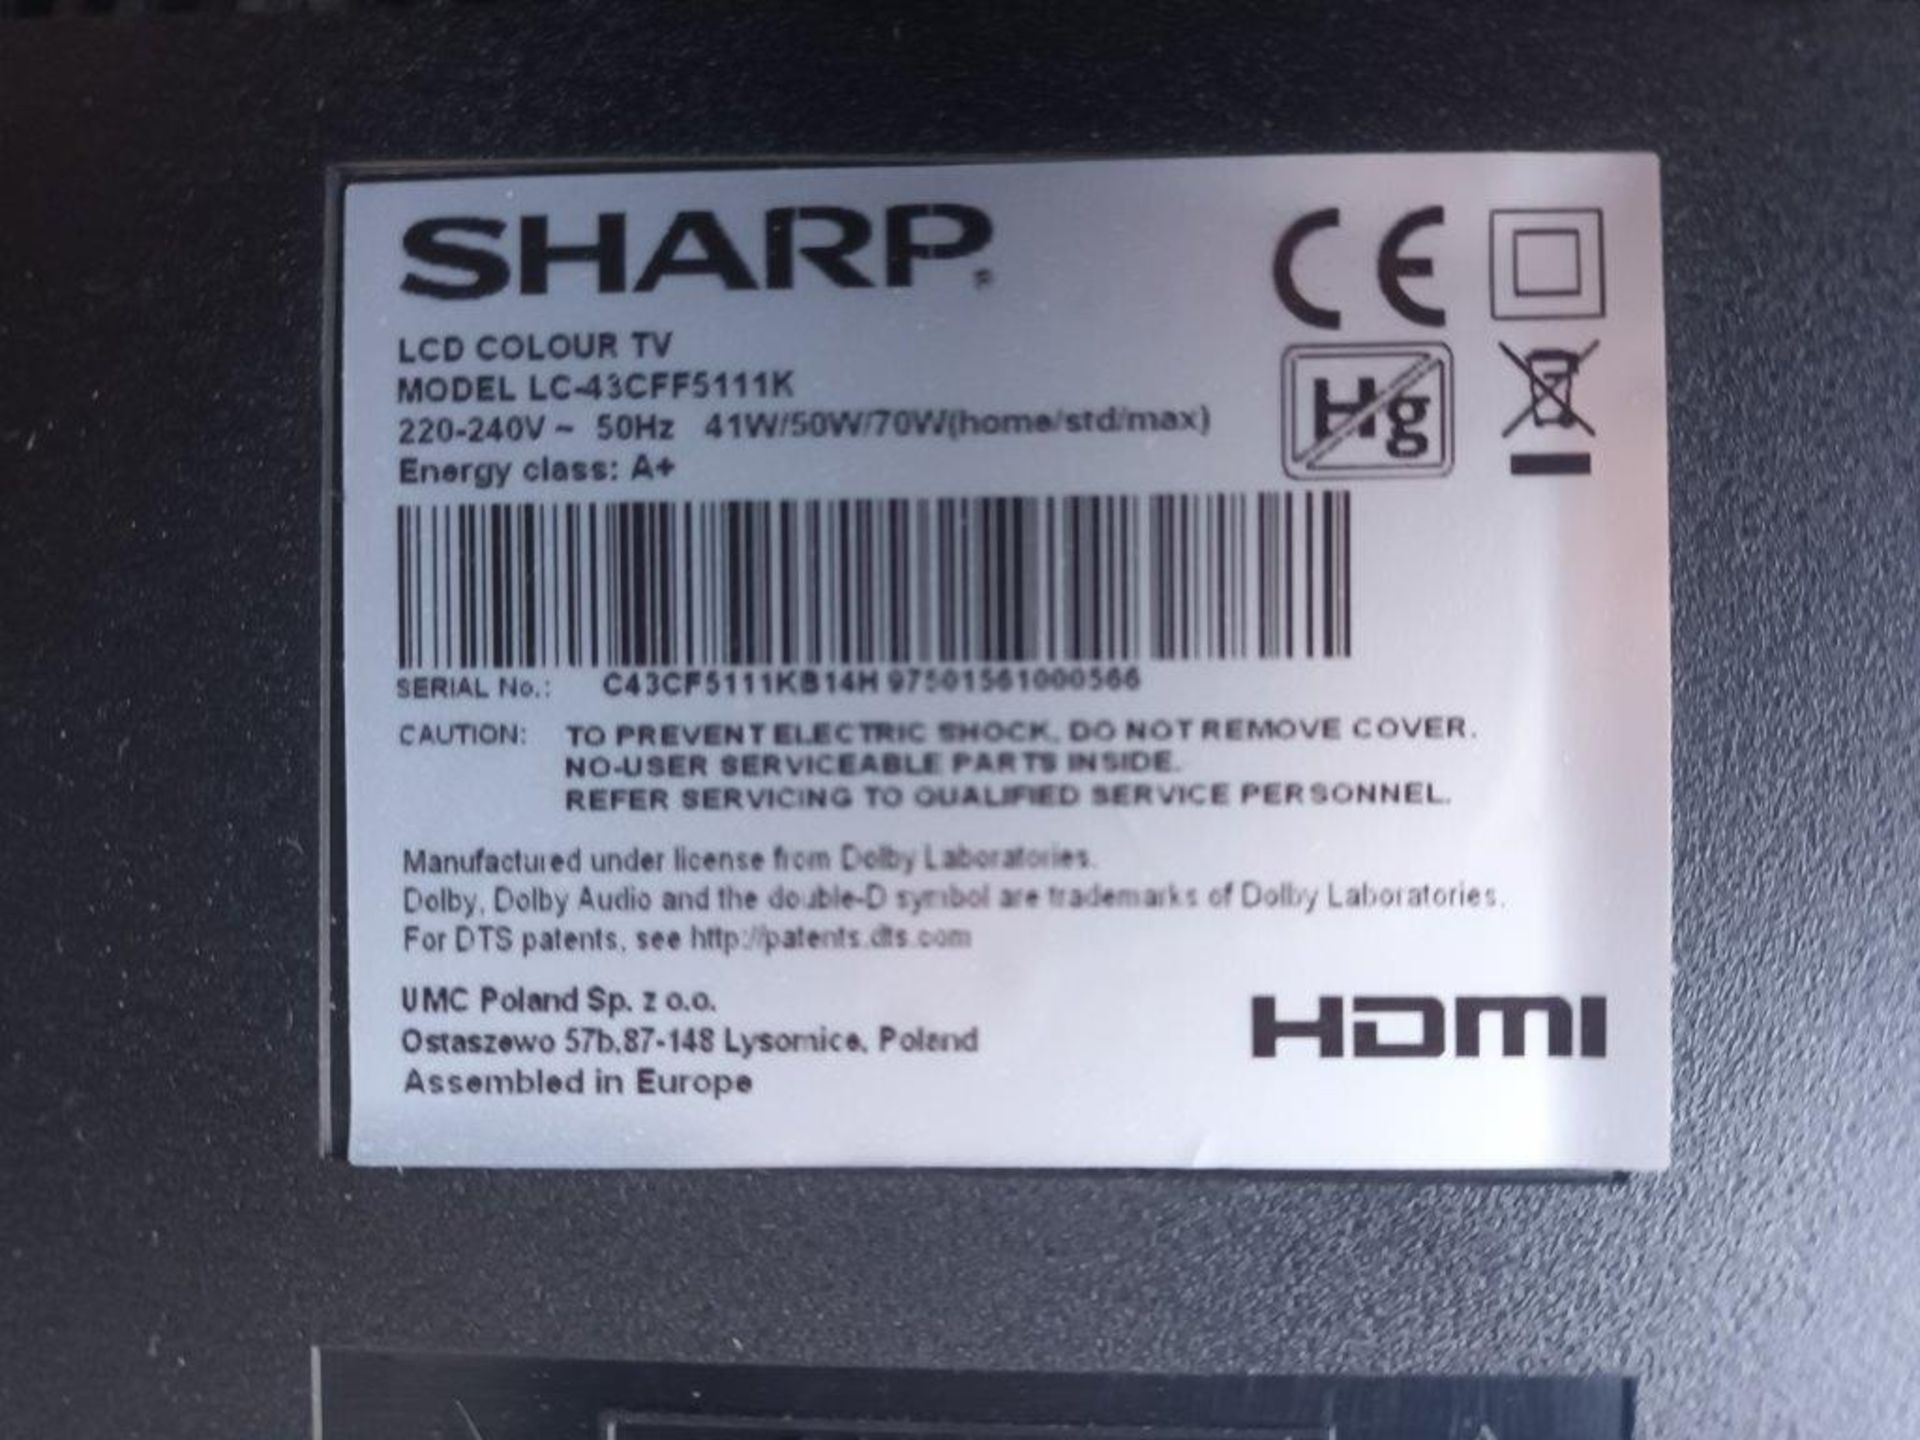 Sharp LC-43CFF5111K 43" LCD colour TV - Image 3 of 4